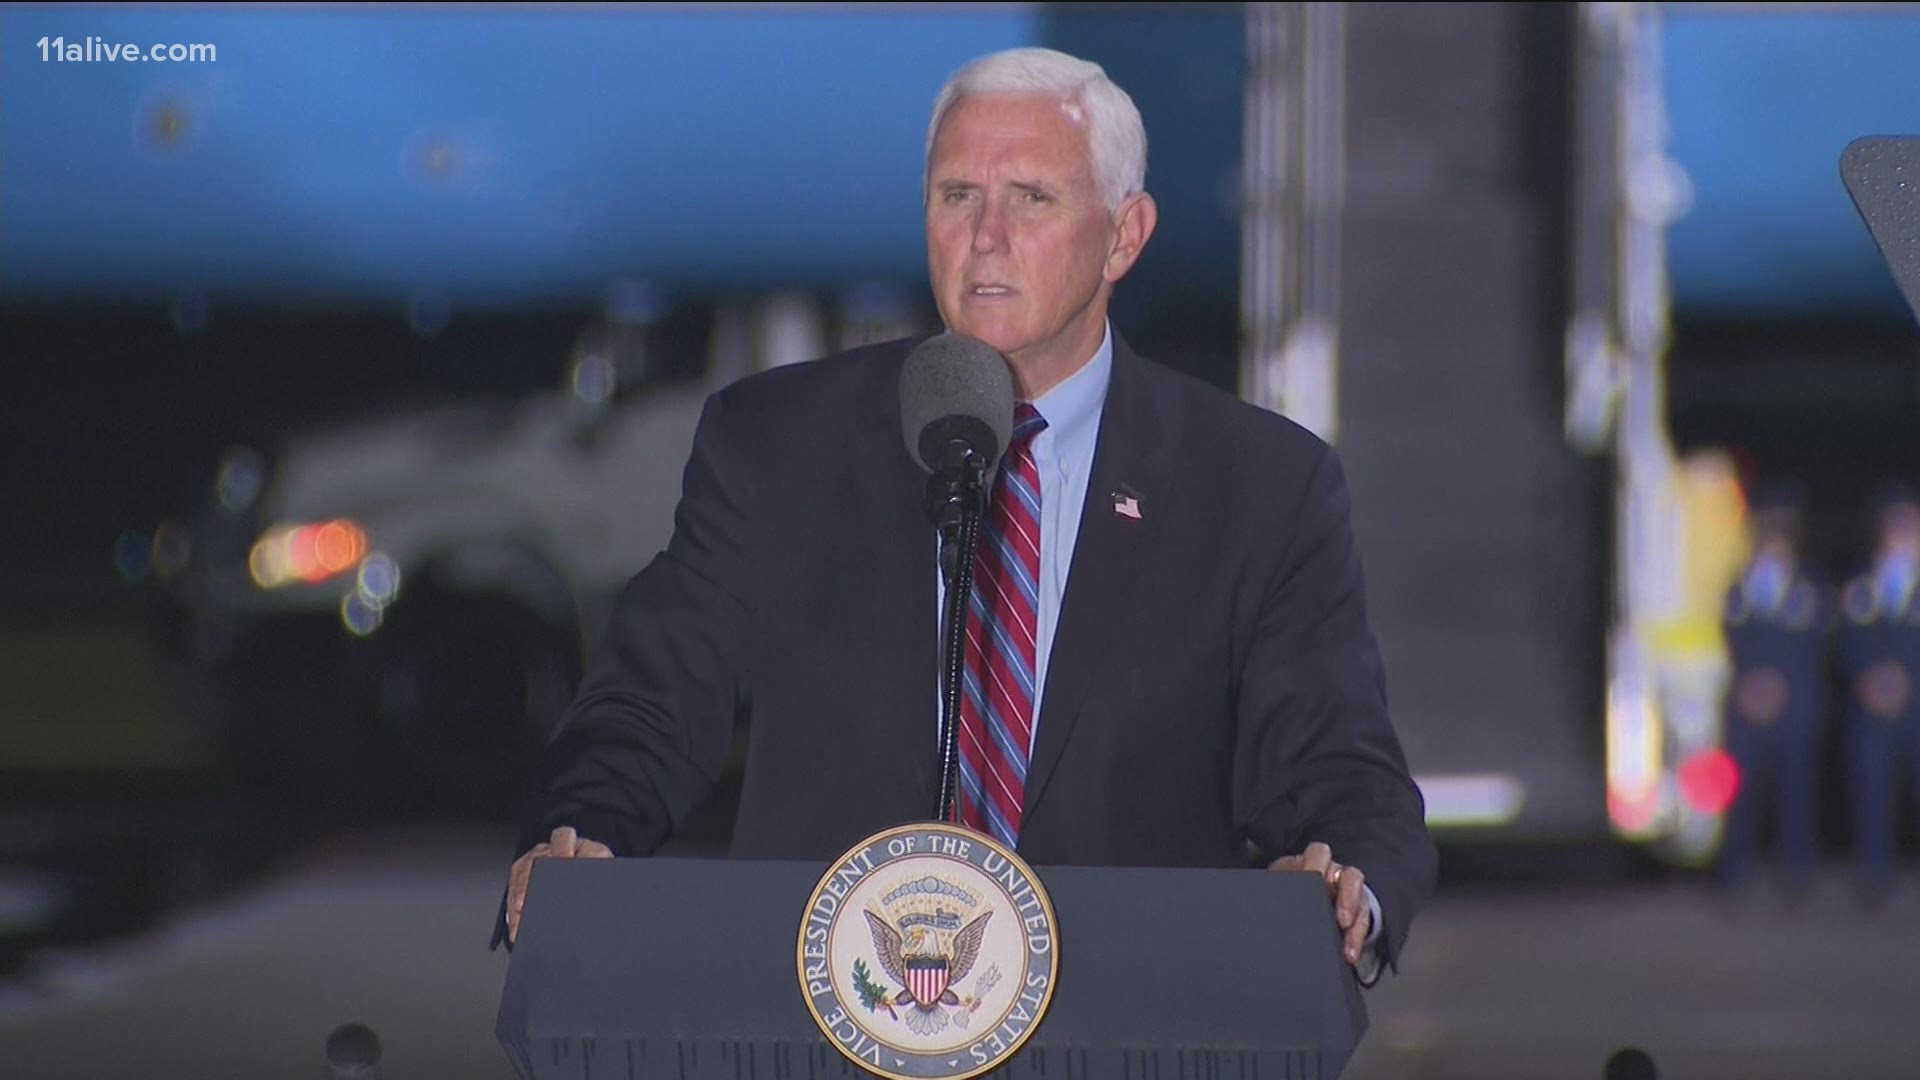 The Vice President will continue campaigning across the country.